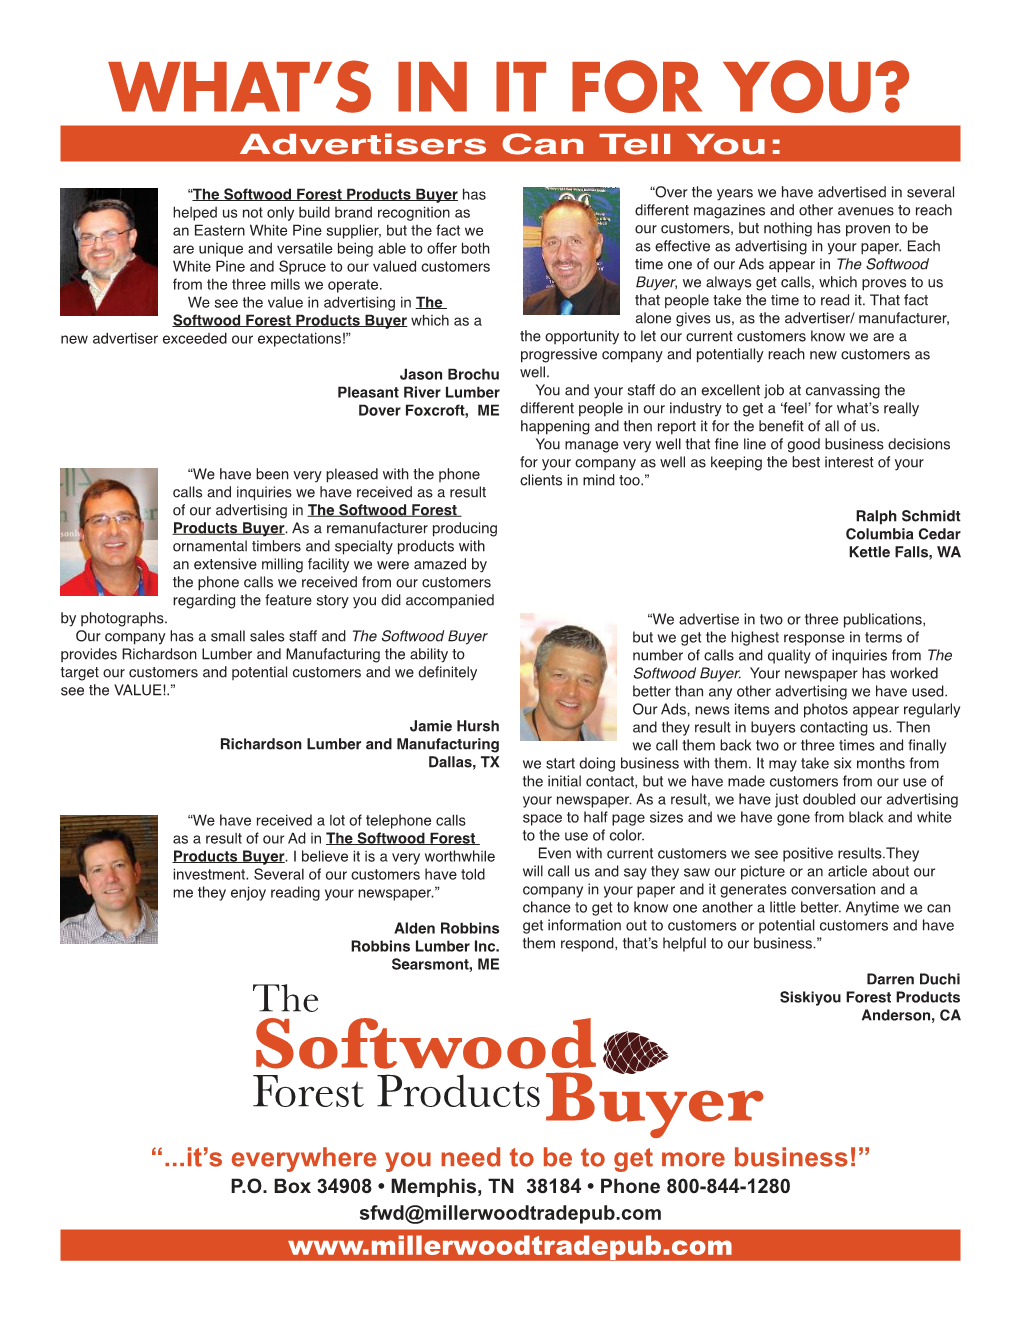 The Softwood Forest Products Buyer